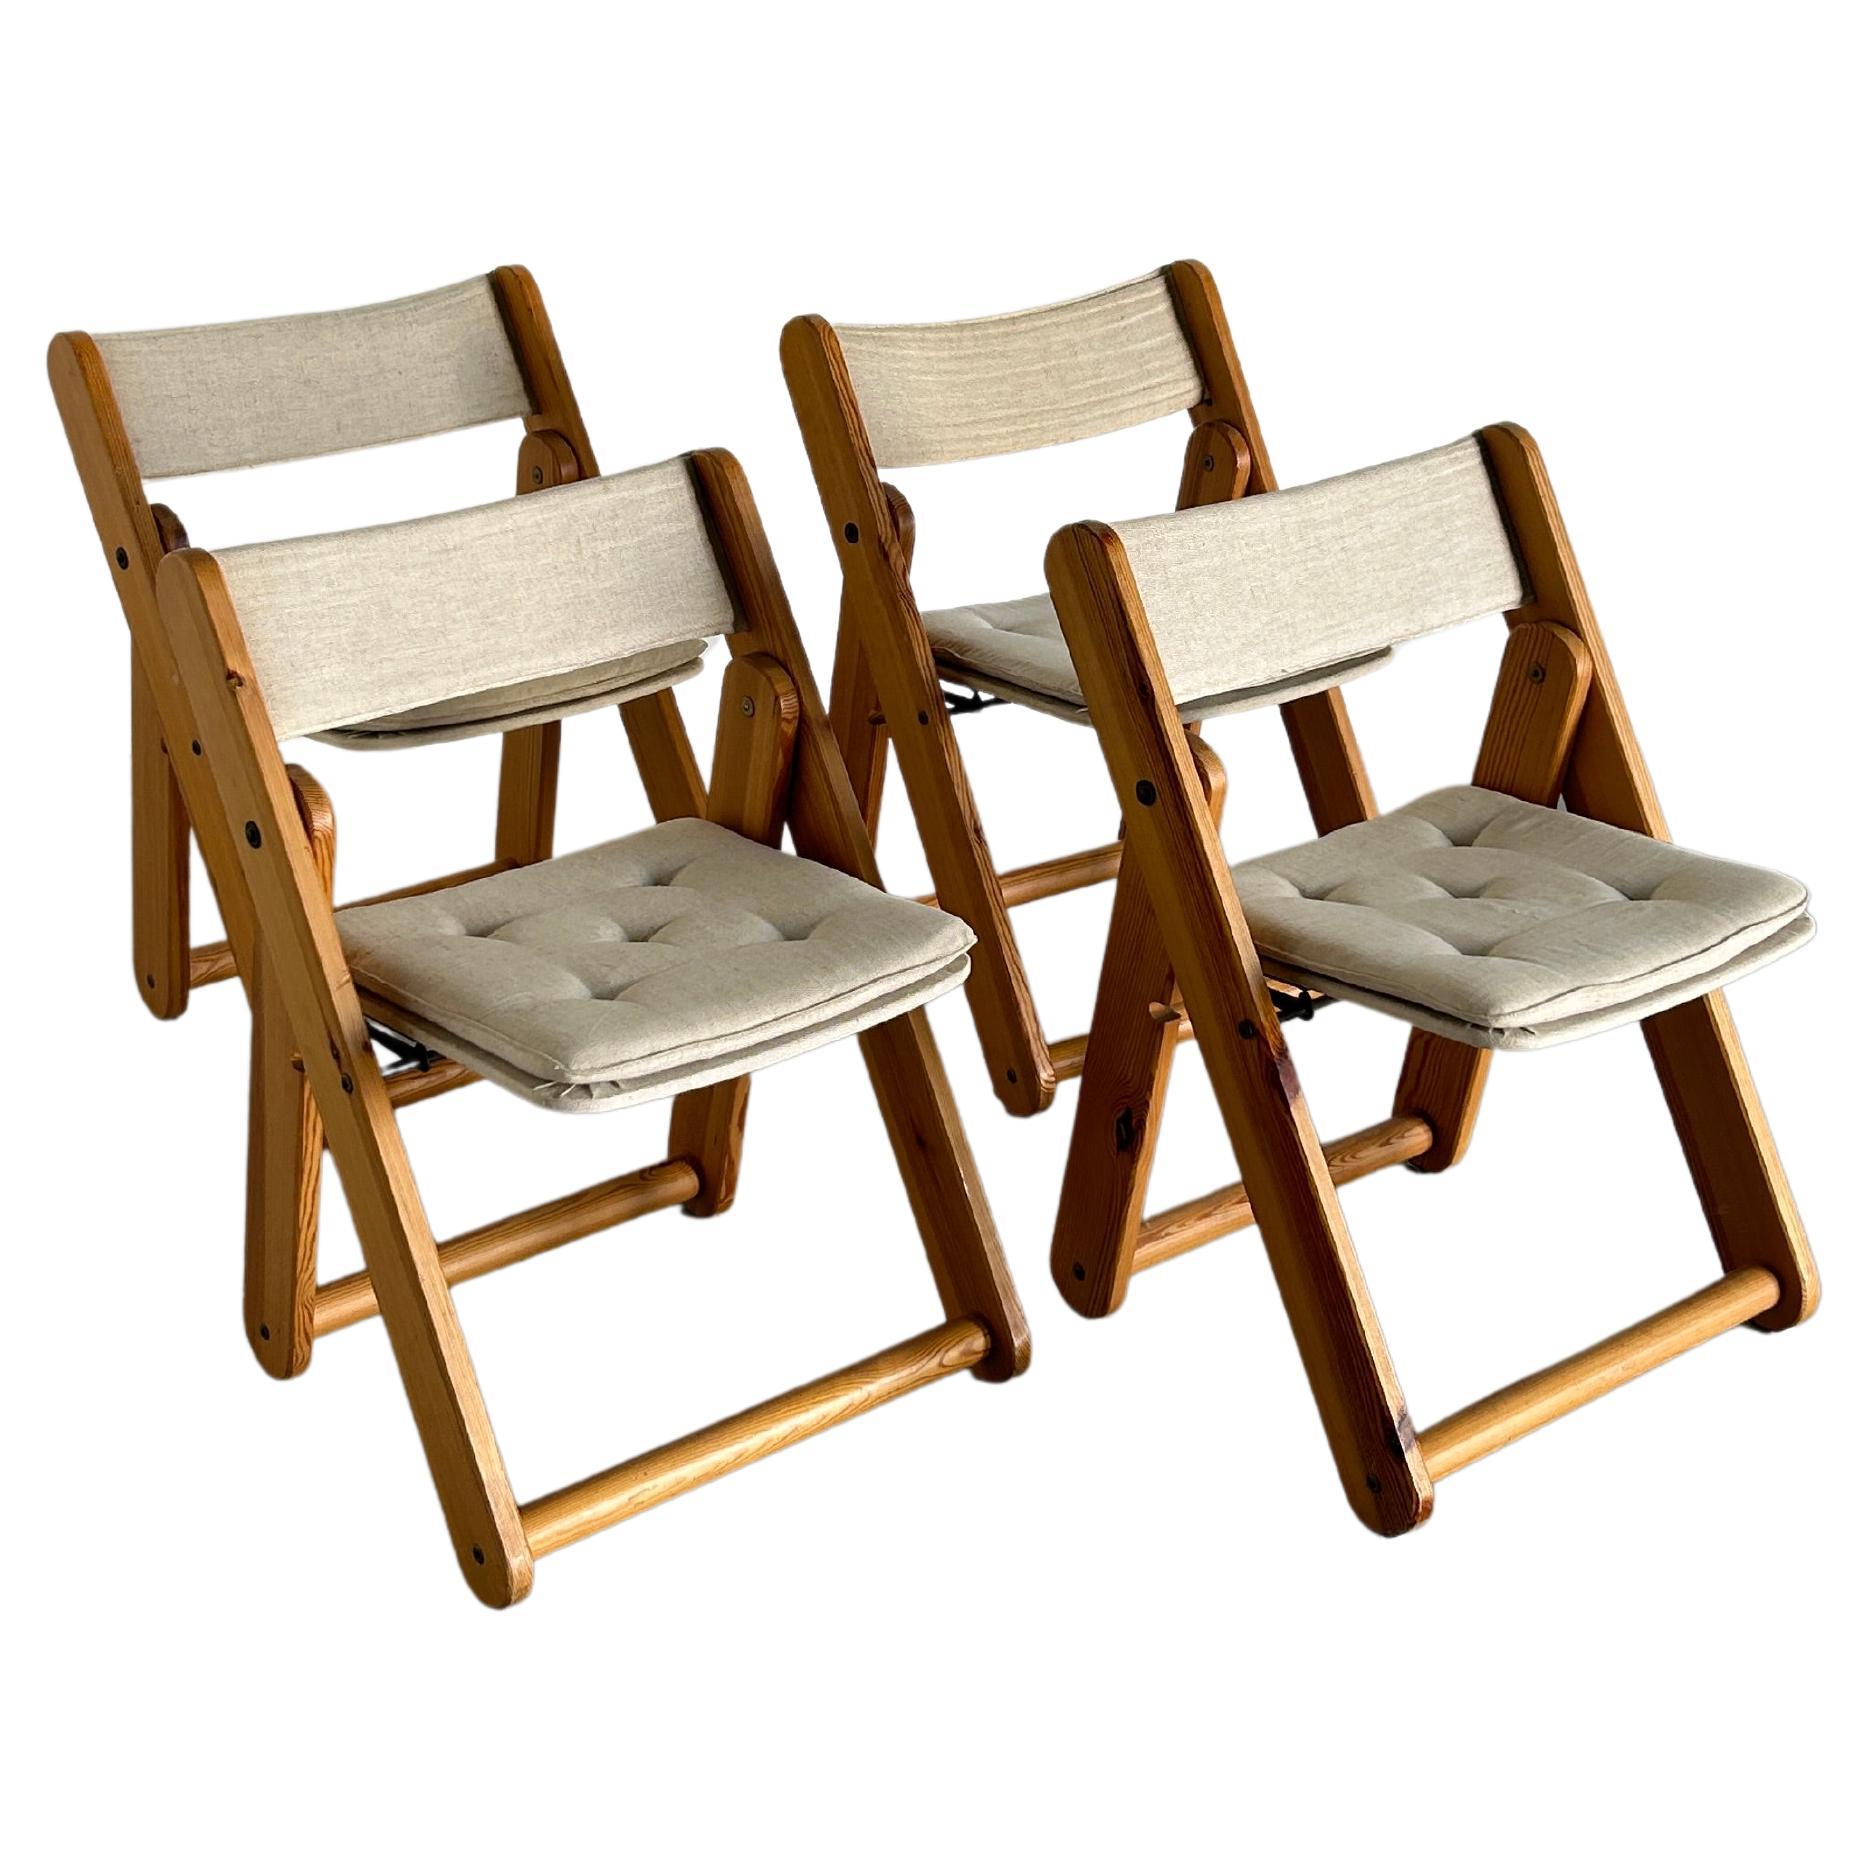 Set of four solid pine and canvas folding chairs designed by Gillis Lundgren for IKEA, 1970s.

Very good original vintage condition with expected signs of age. Authentically aged wood. Smaller surface scratches and scuffs are present, as indicated